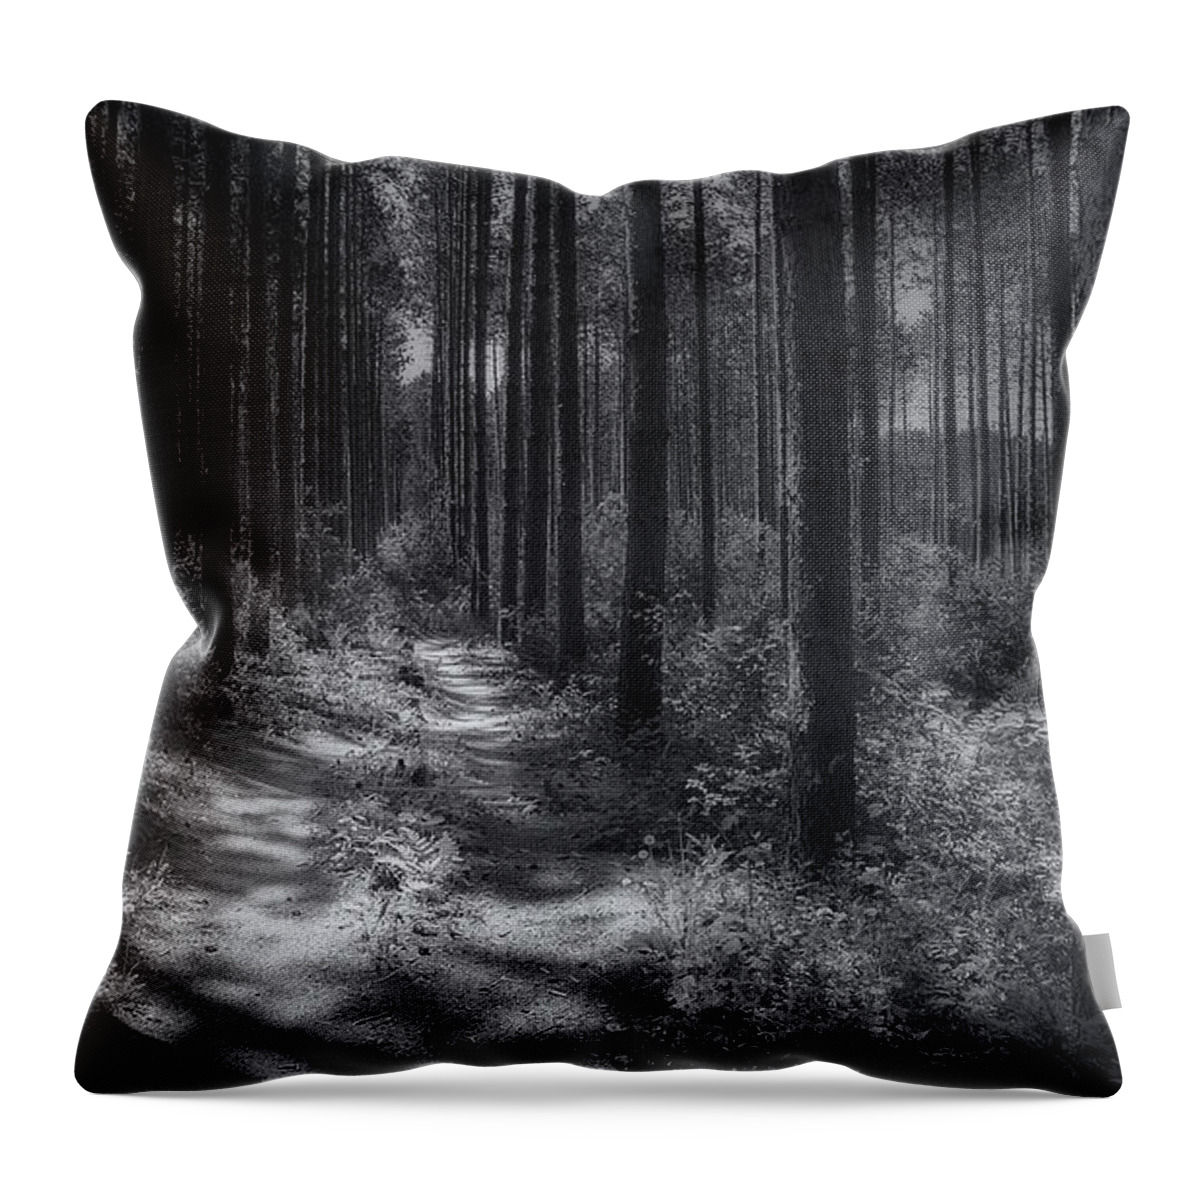 Trees Throw Pillow featuring the photograph Pine Grove by Scott Norris